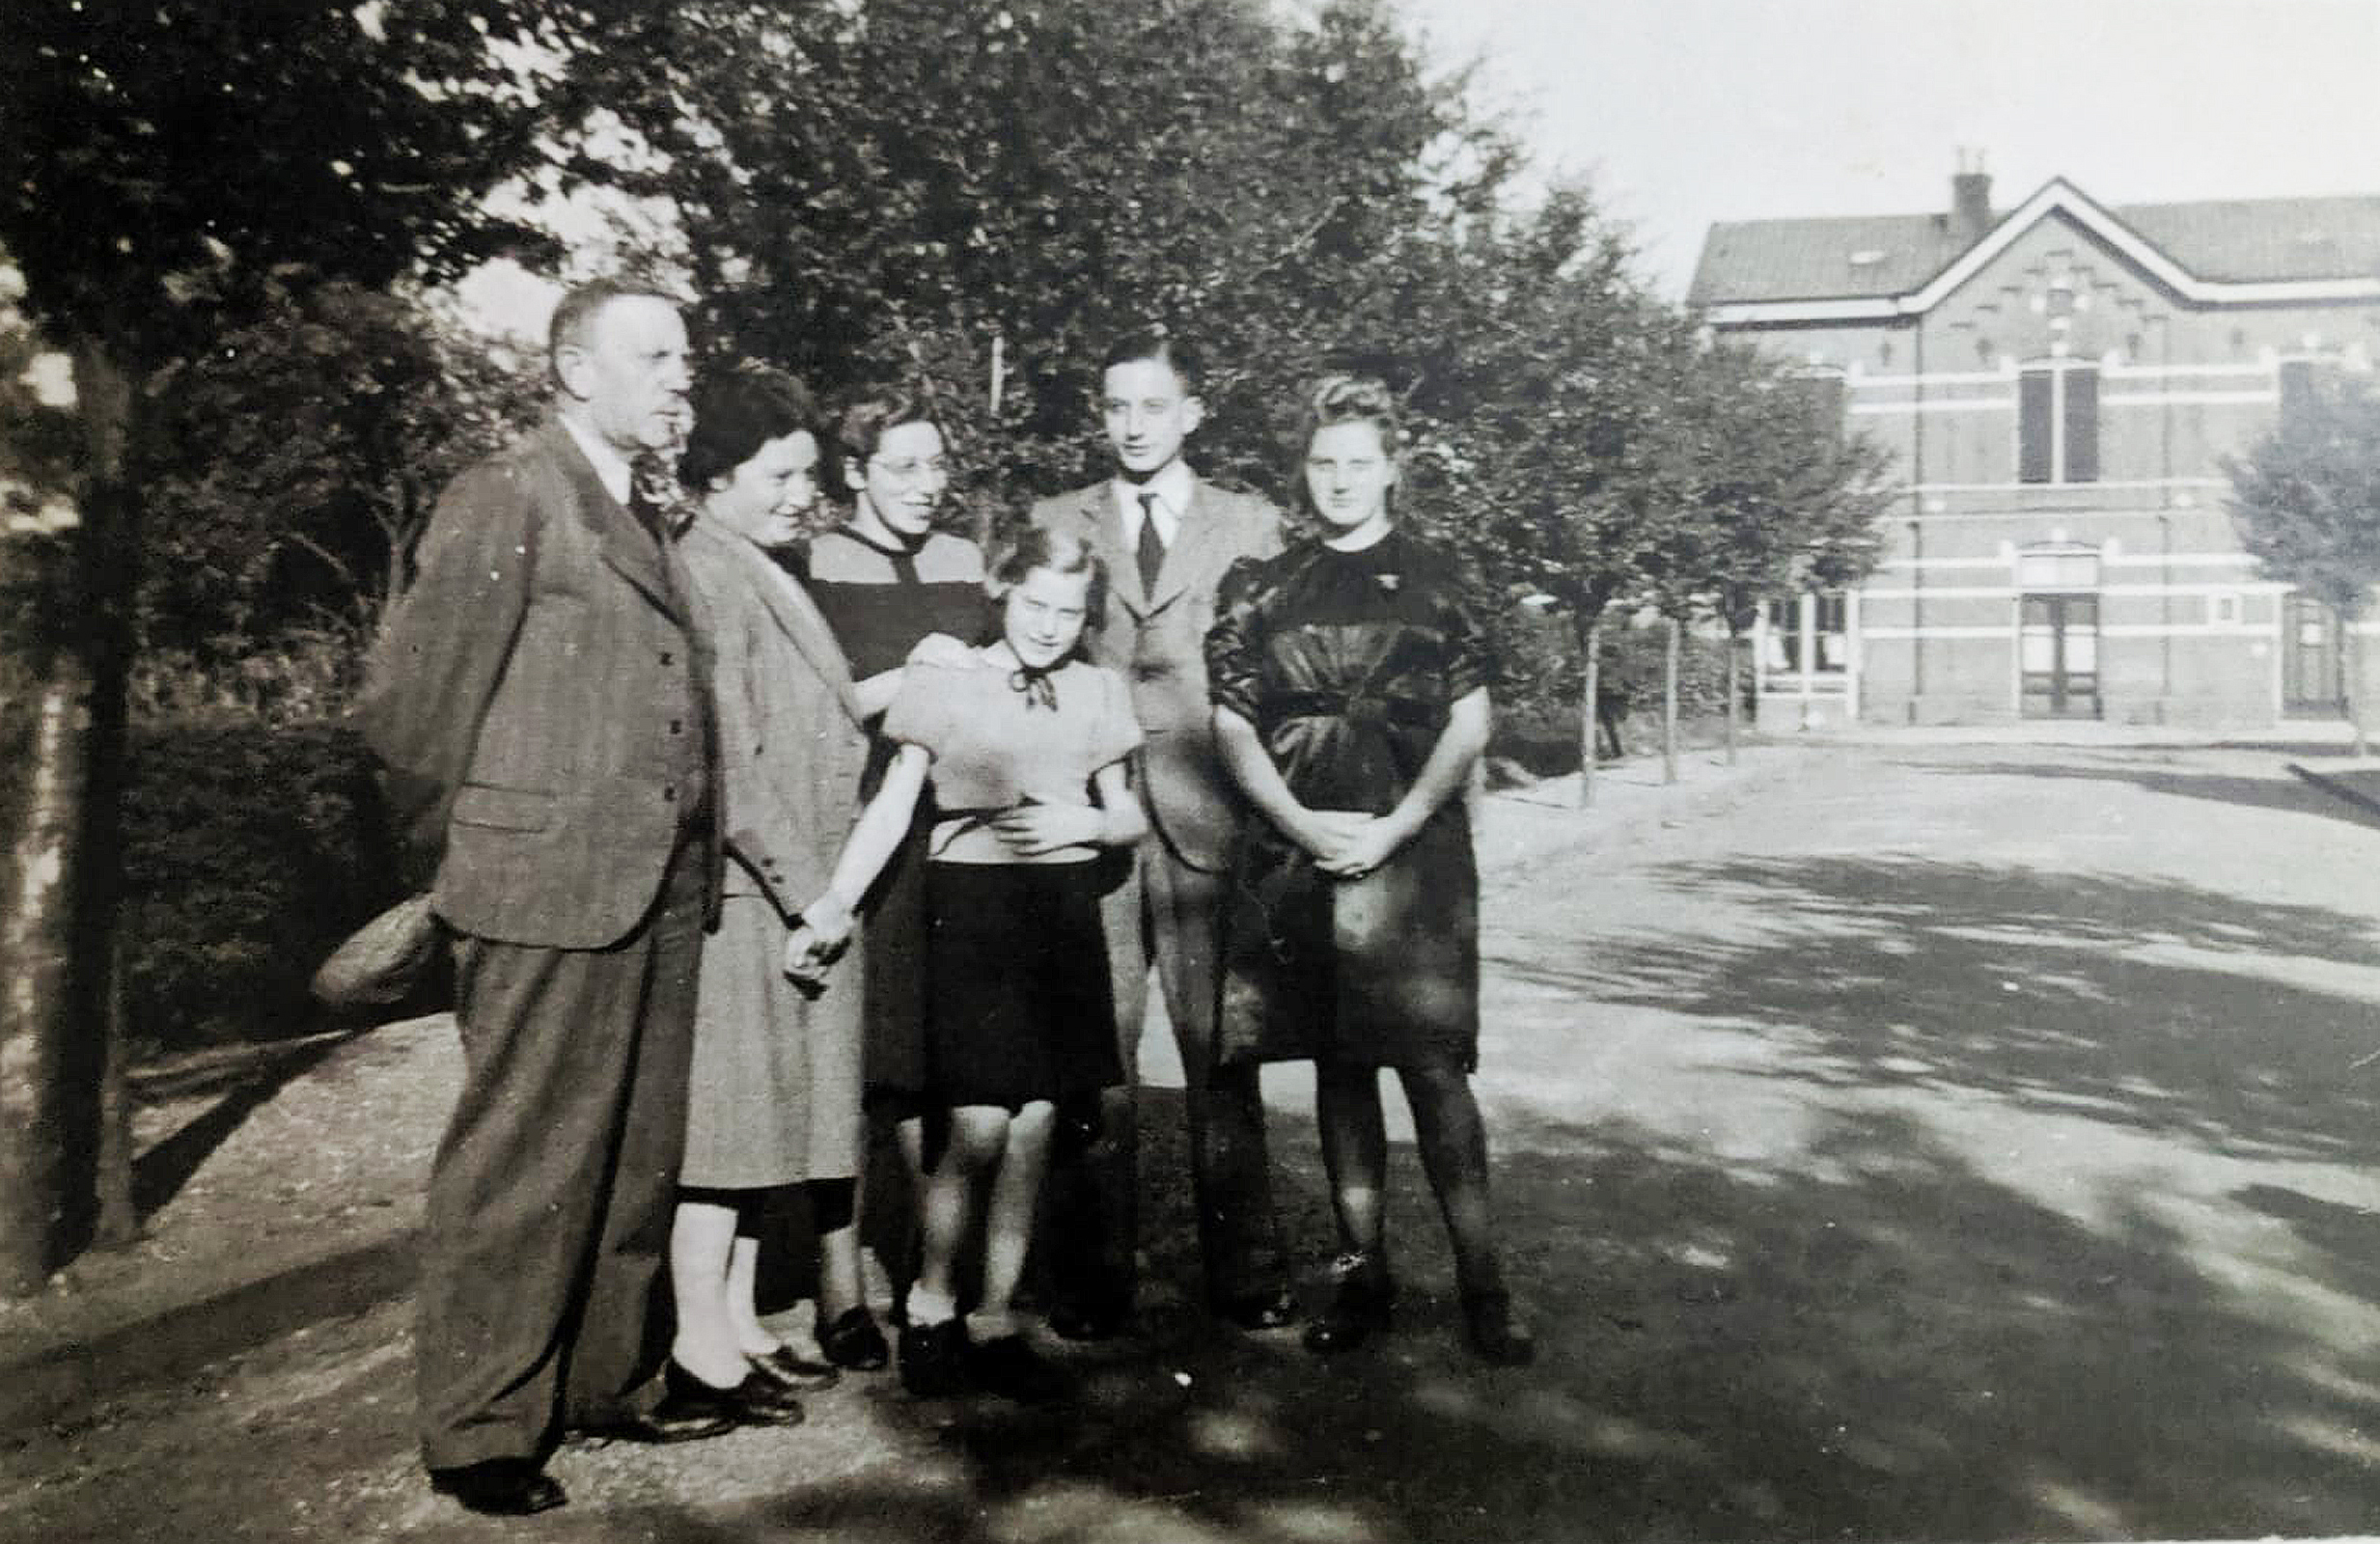 A family photo of the Heymans family before the Holocaust. Vardit is the girl in the center of the photo.